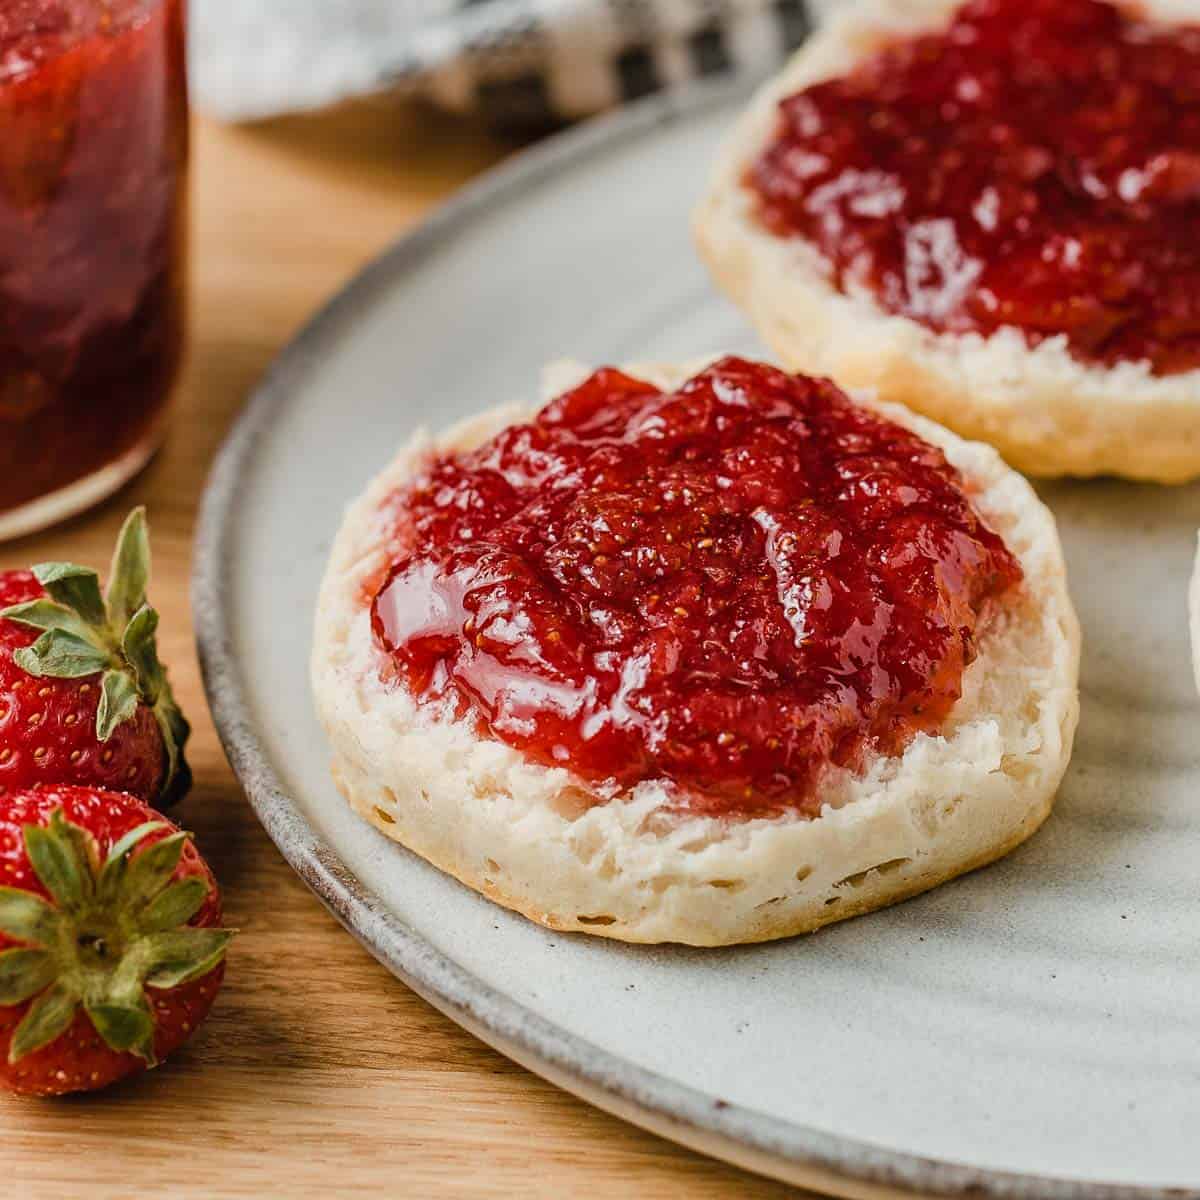 Fresh strawberry jam with biscuits.